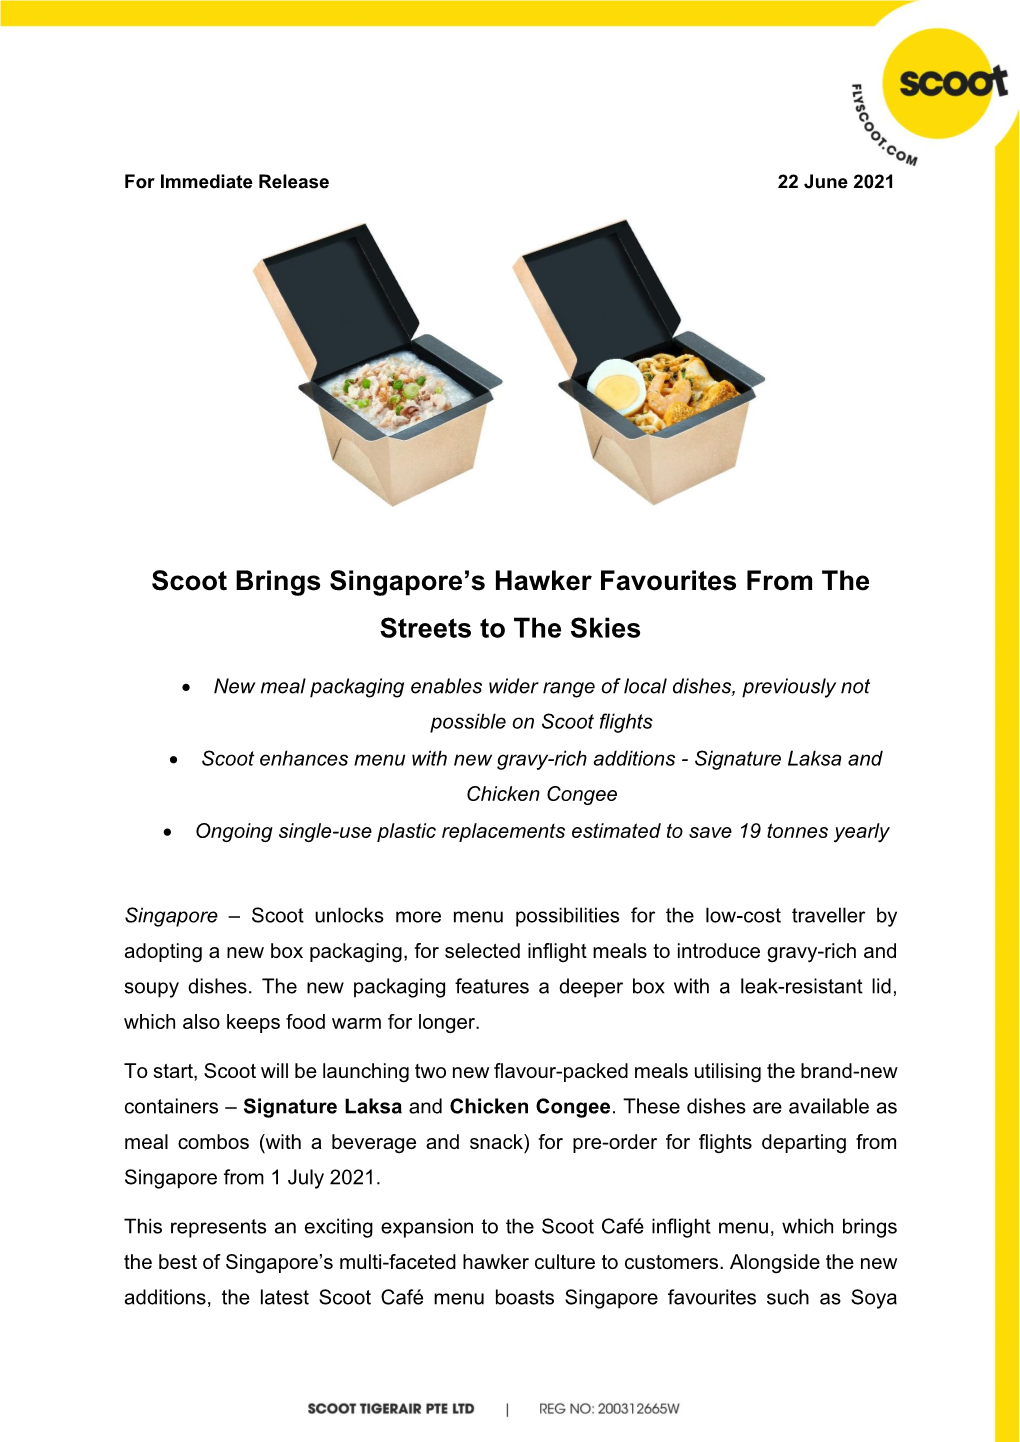 Scoot Brings Singapore's Hawker Favourites from the Streets